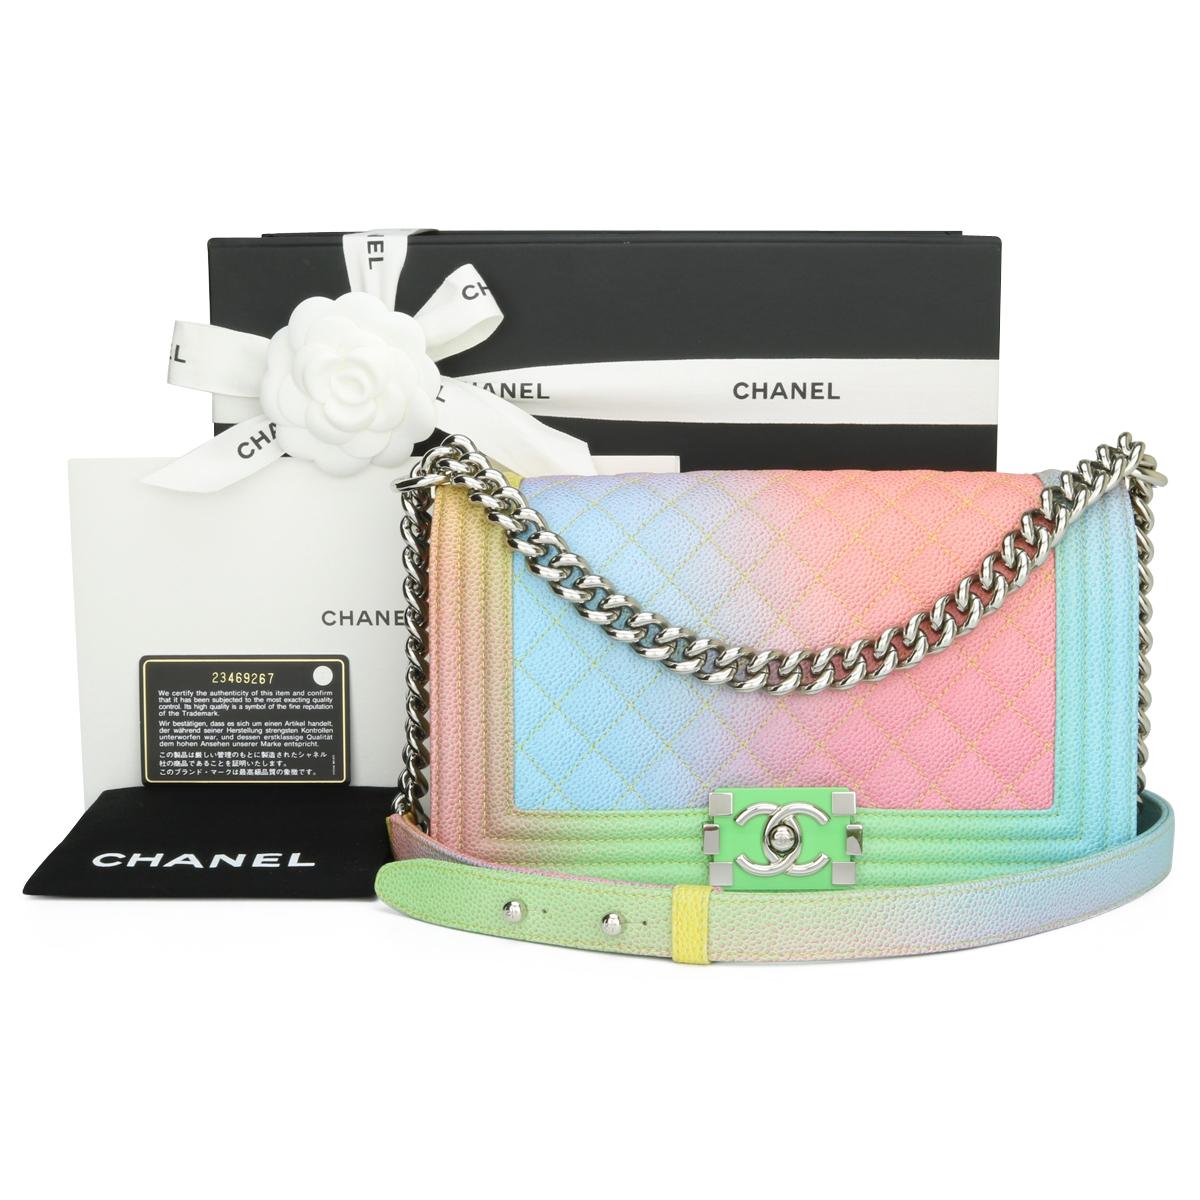 CHANEL Old Medium Boy Bag Rainbow Cuba Caviar with Shiny Silver Hardware 2017.

This stunning bag is still in excellent condition, the bag still holds its original shape, and the hardware is still very clean and shiny.

‘Charming, colourful, flirty,